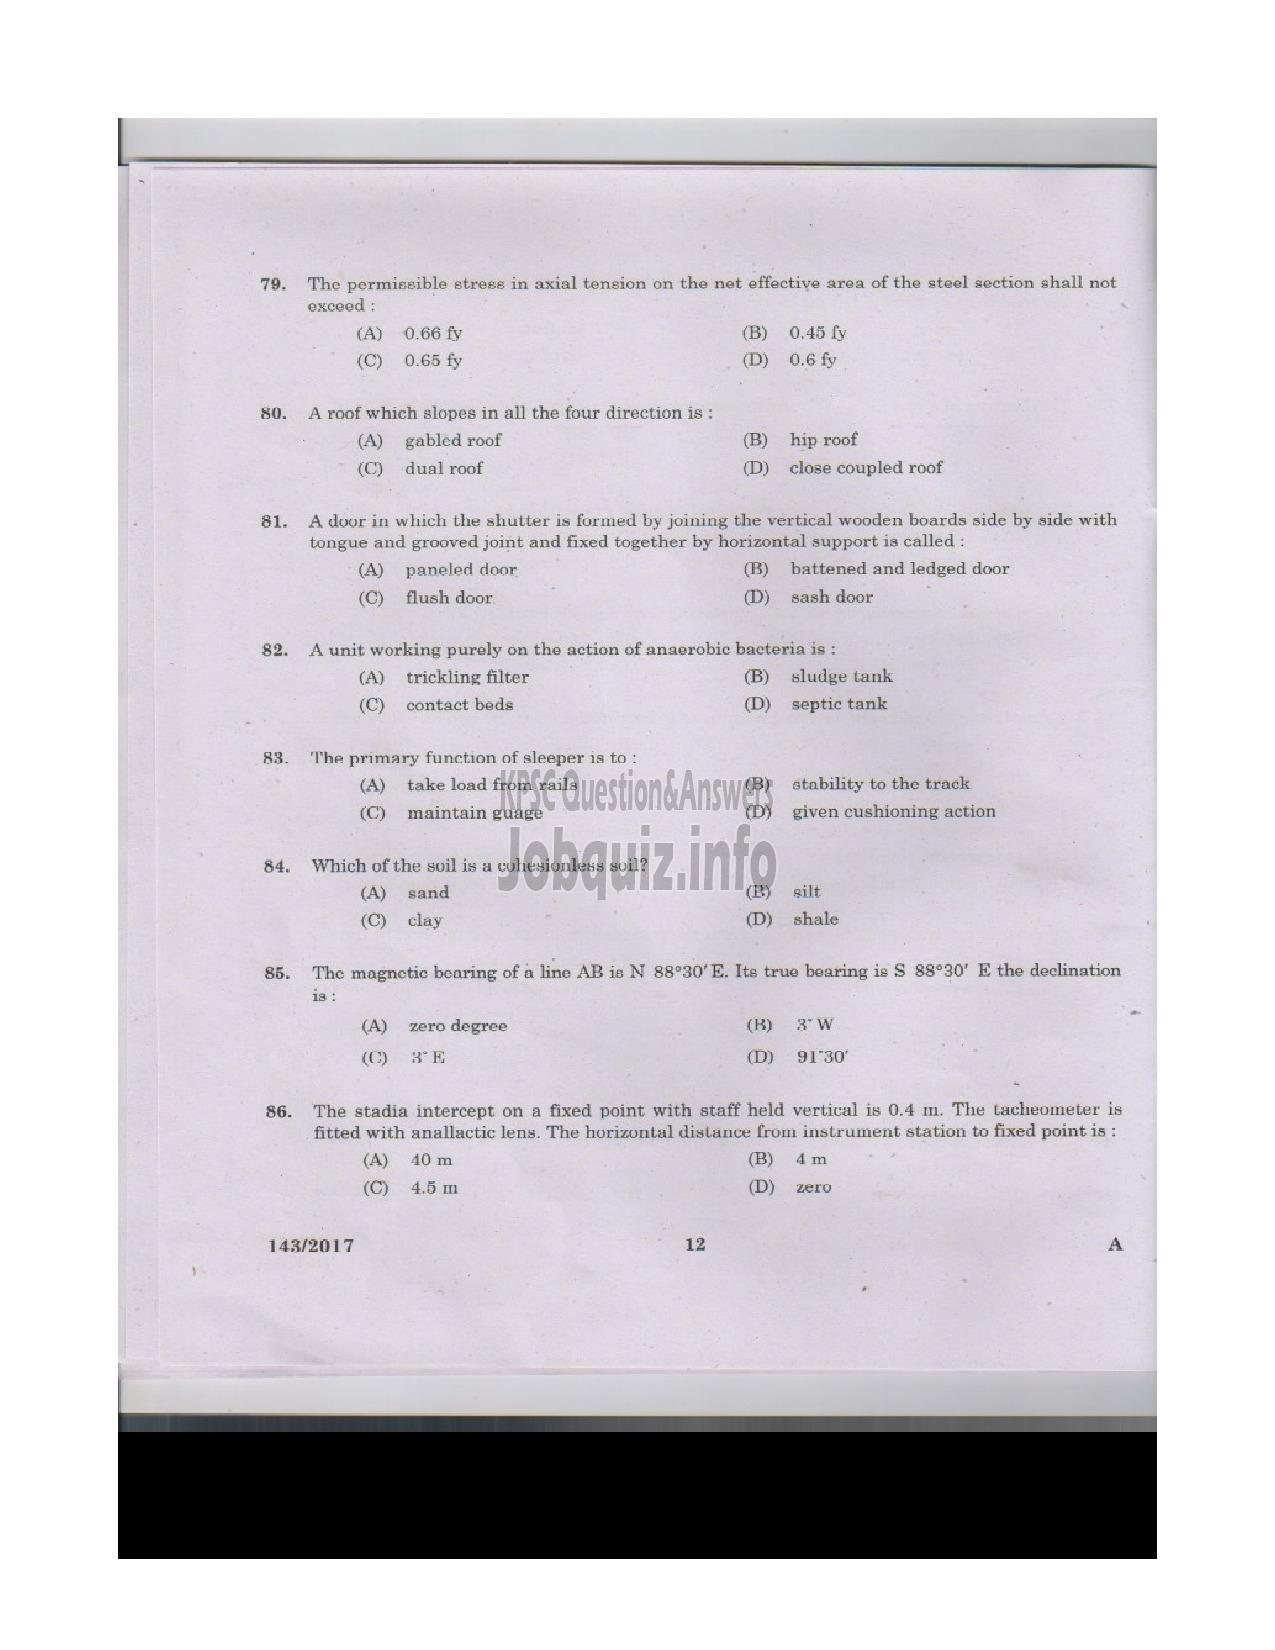 Kerala PSC Question Paper - VOCATIONAL INSTRUCTOR IN CIVIL CONSTRUCTION ANDMAINTENANCE VOCATIONAL HIGHER SECONDARY-11